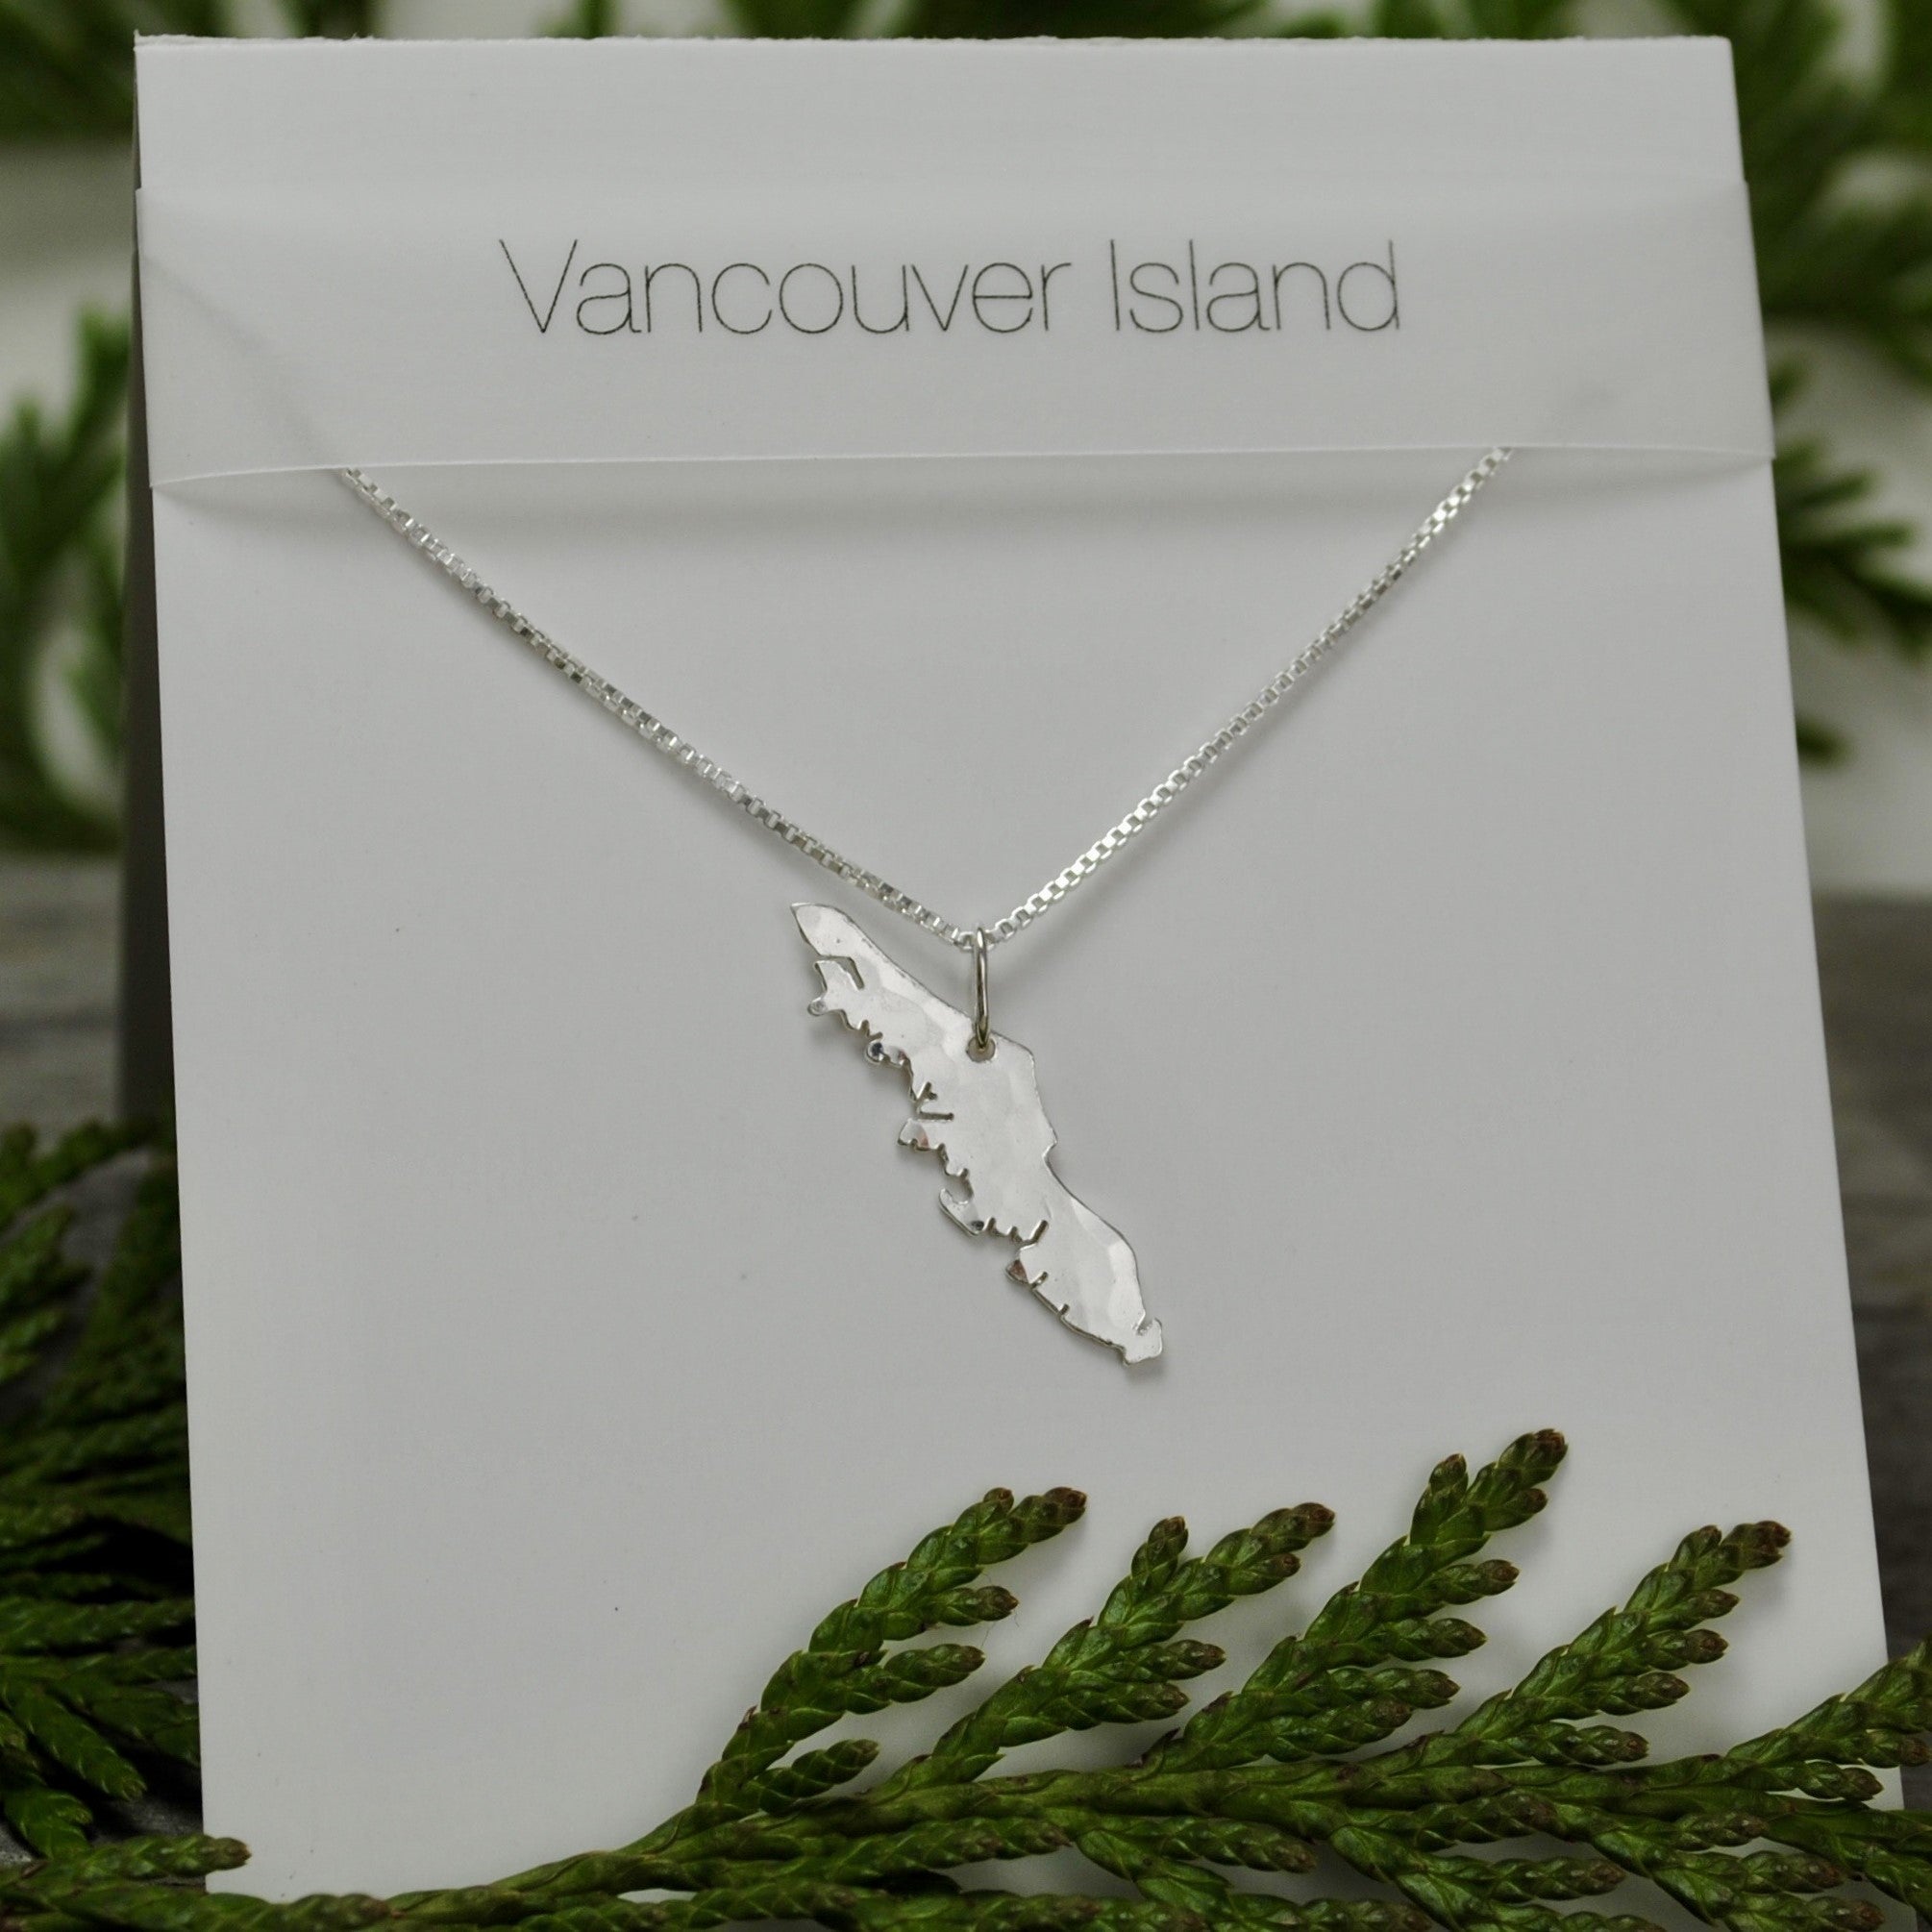 Elements Gallery "Vancouver Island" Necklace